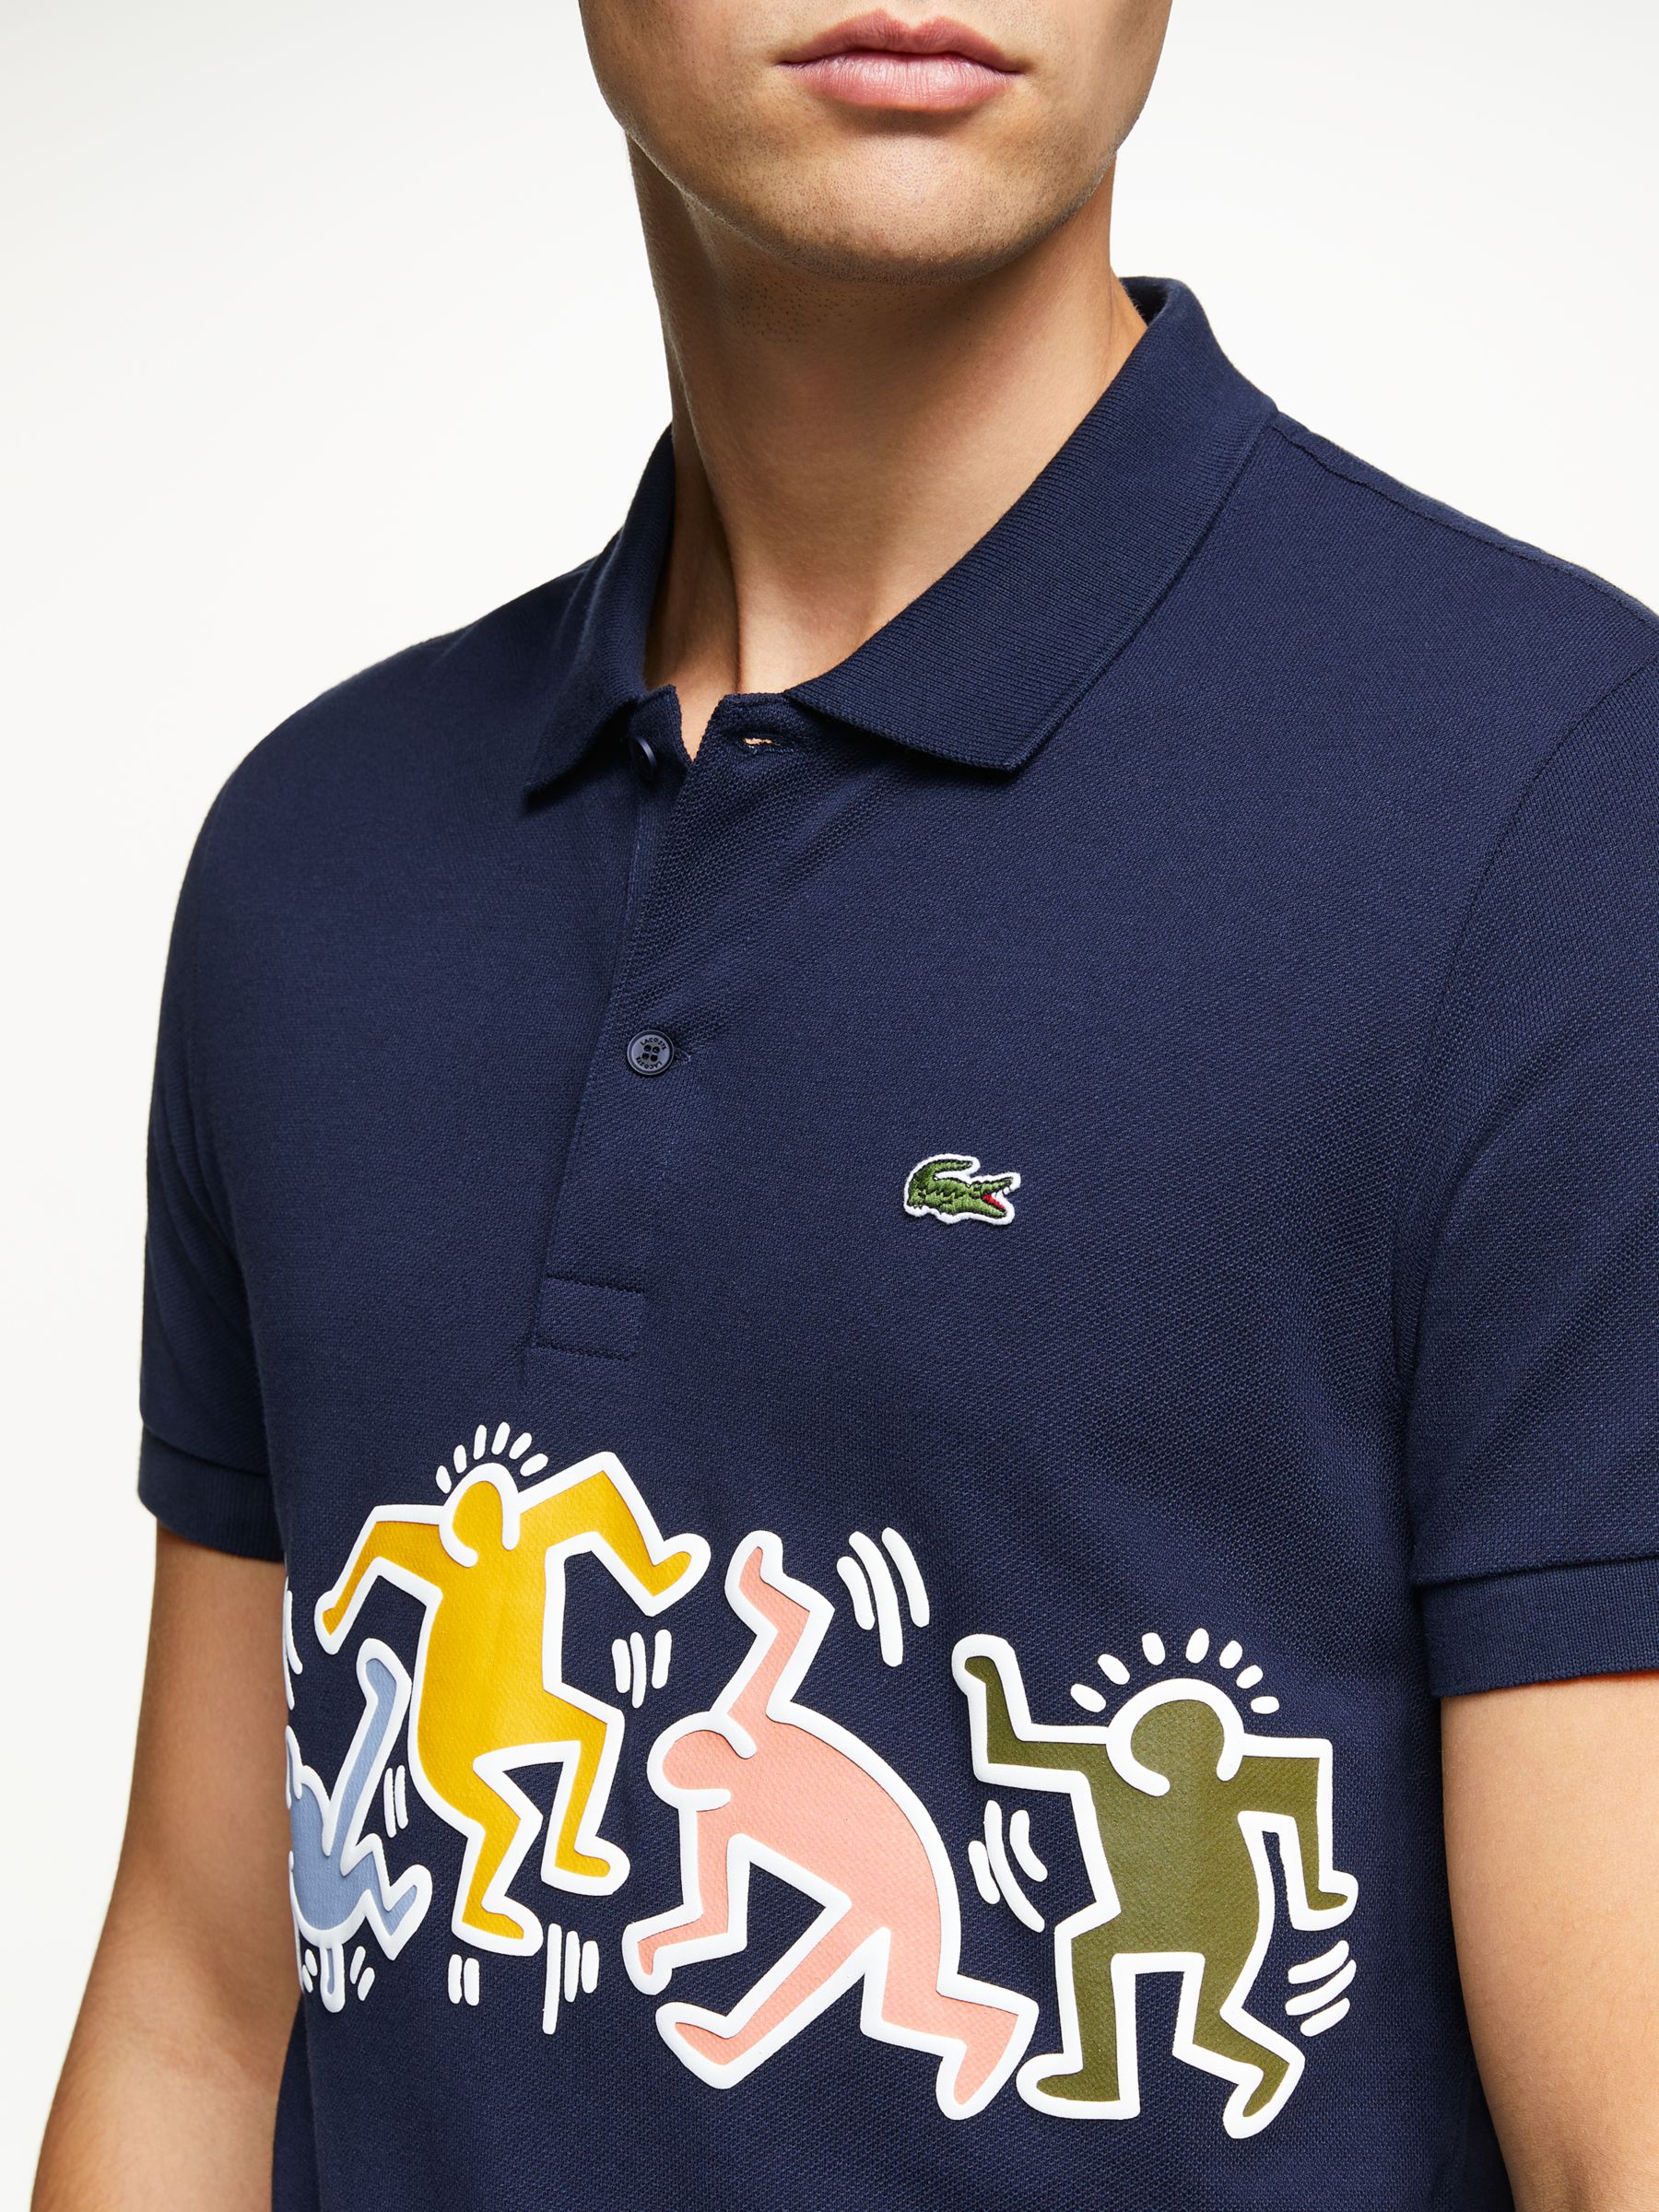 lacoste and keith haring